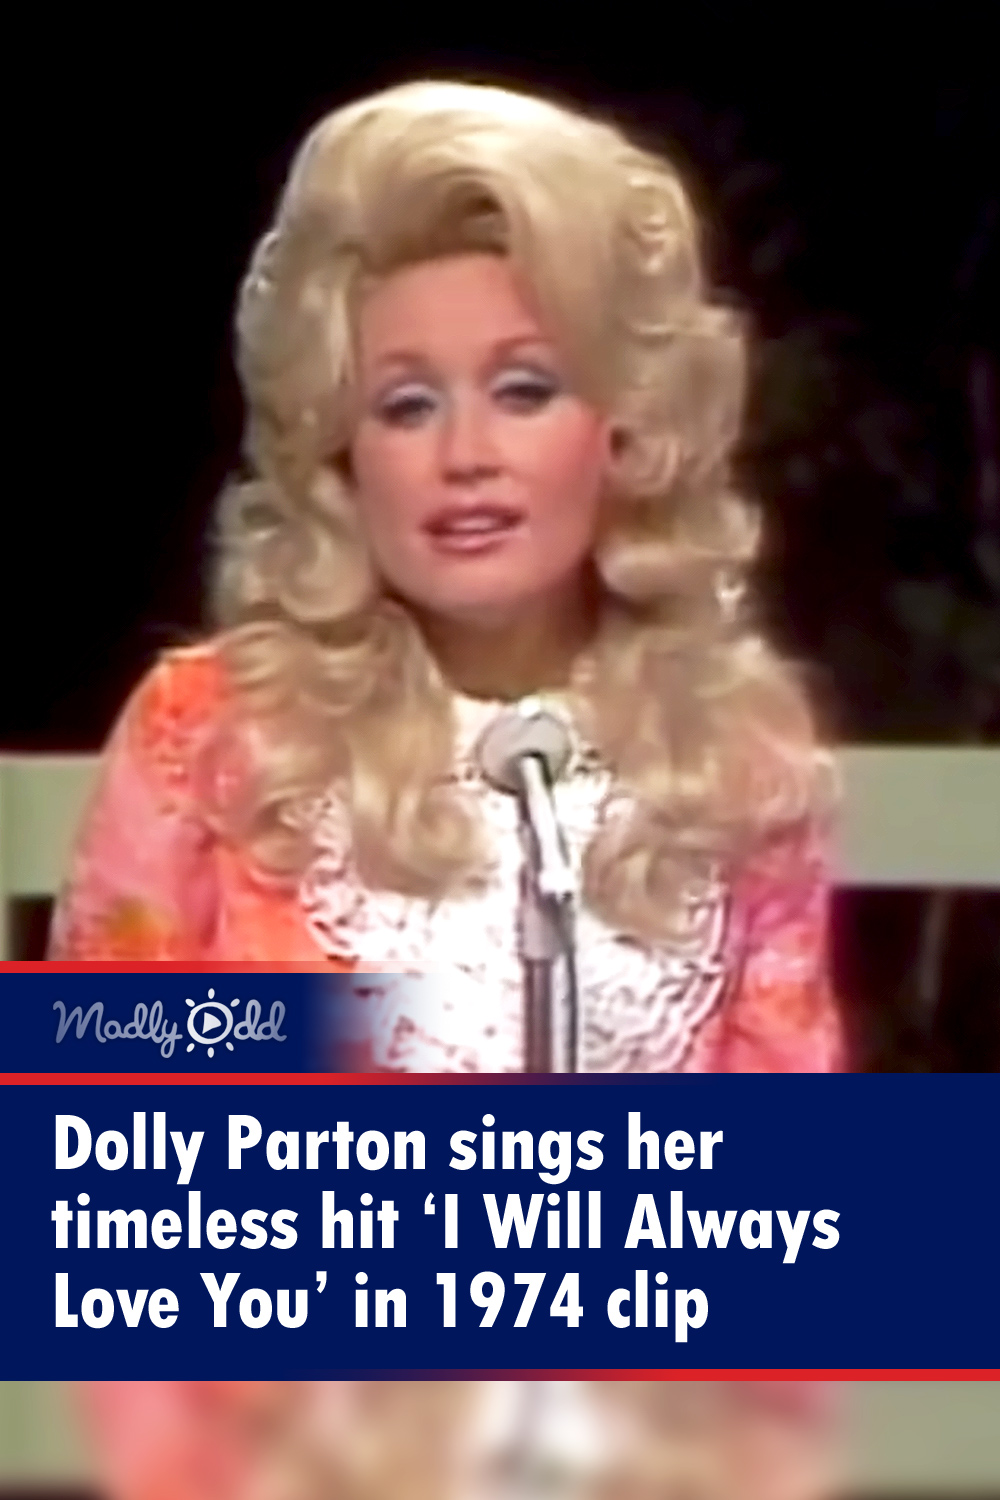 Dolly Parton sings her timeless hit ‘I Will Always Love You’ in 1974 clip